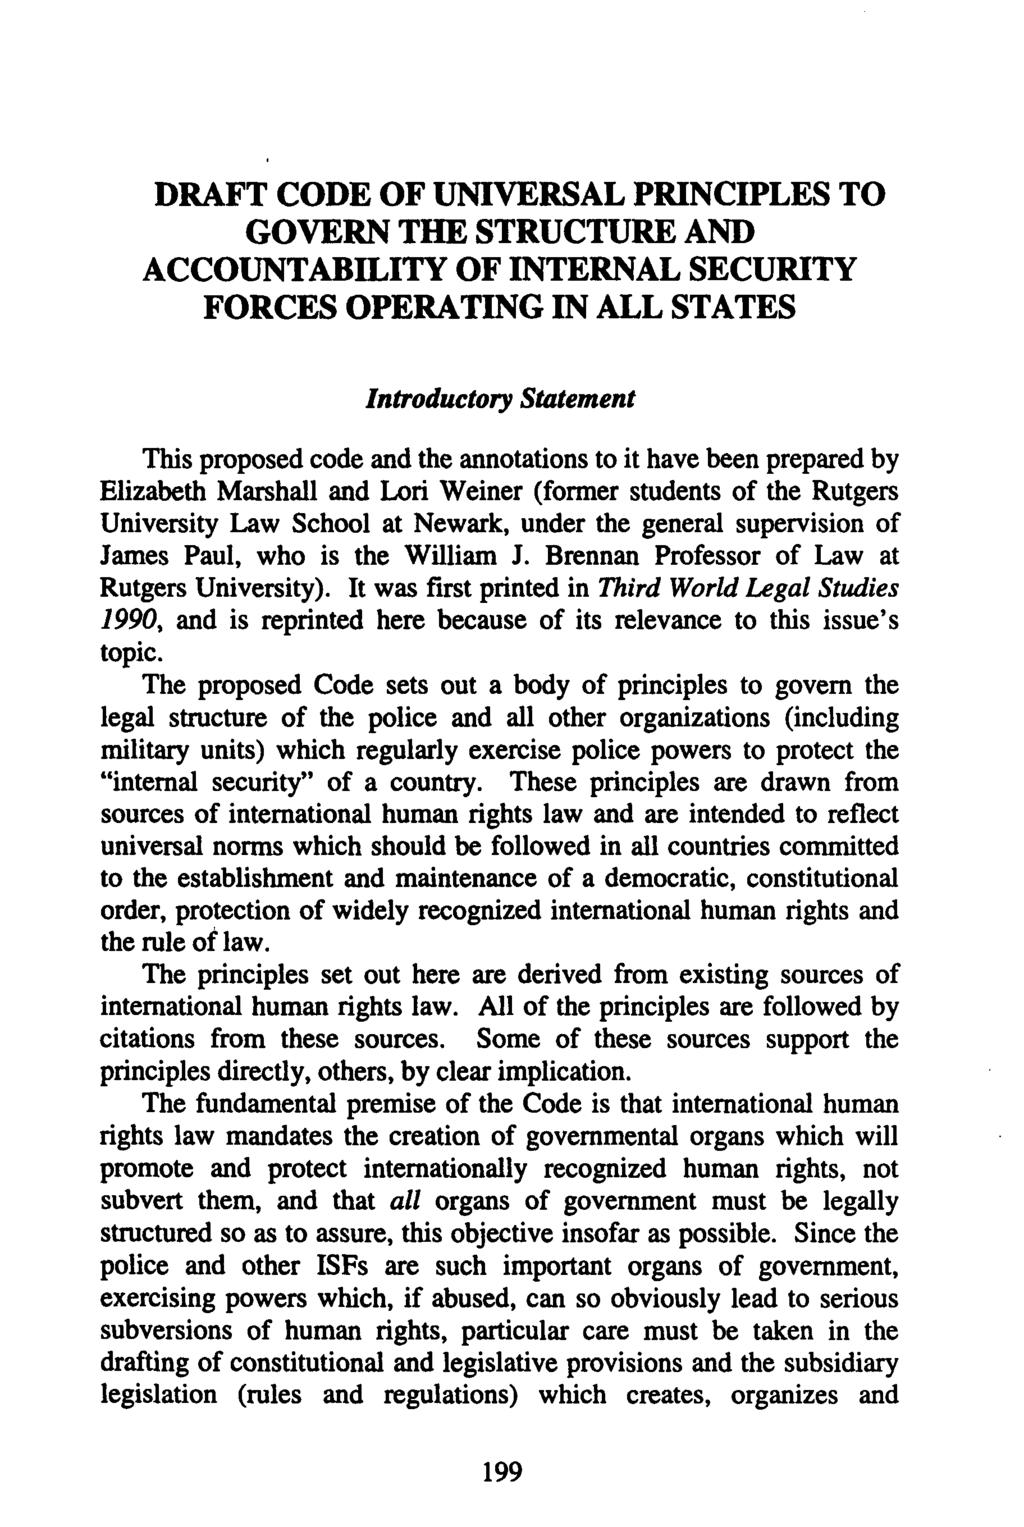 DRAFT CODE OF UNIVERSAL PRINCIPLES TO GOVERN THE STRUCTURE AND ACCOUNTABILITY OF INTERNAL SECURITY FORCES OPERATING IN ALL STATES Introductory Statement This proposed code and the annotations to it